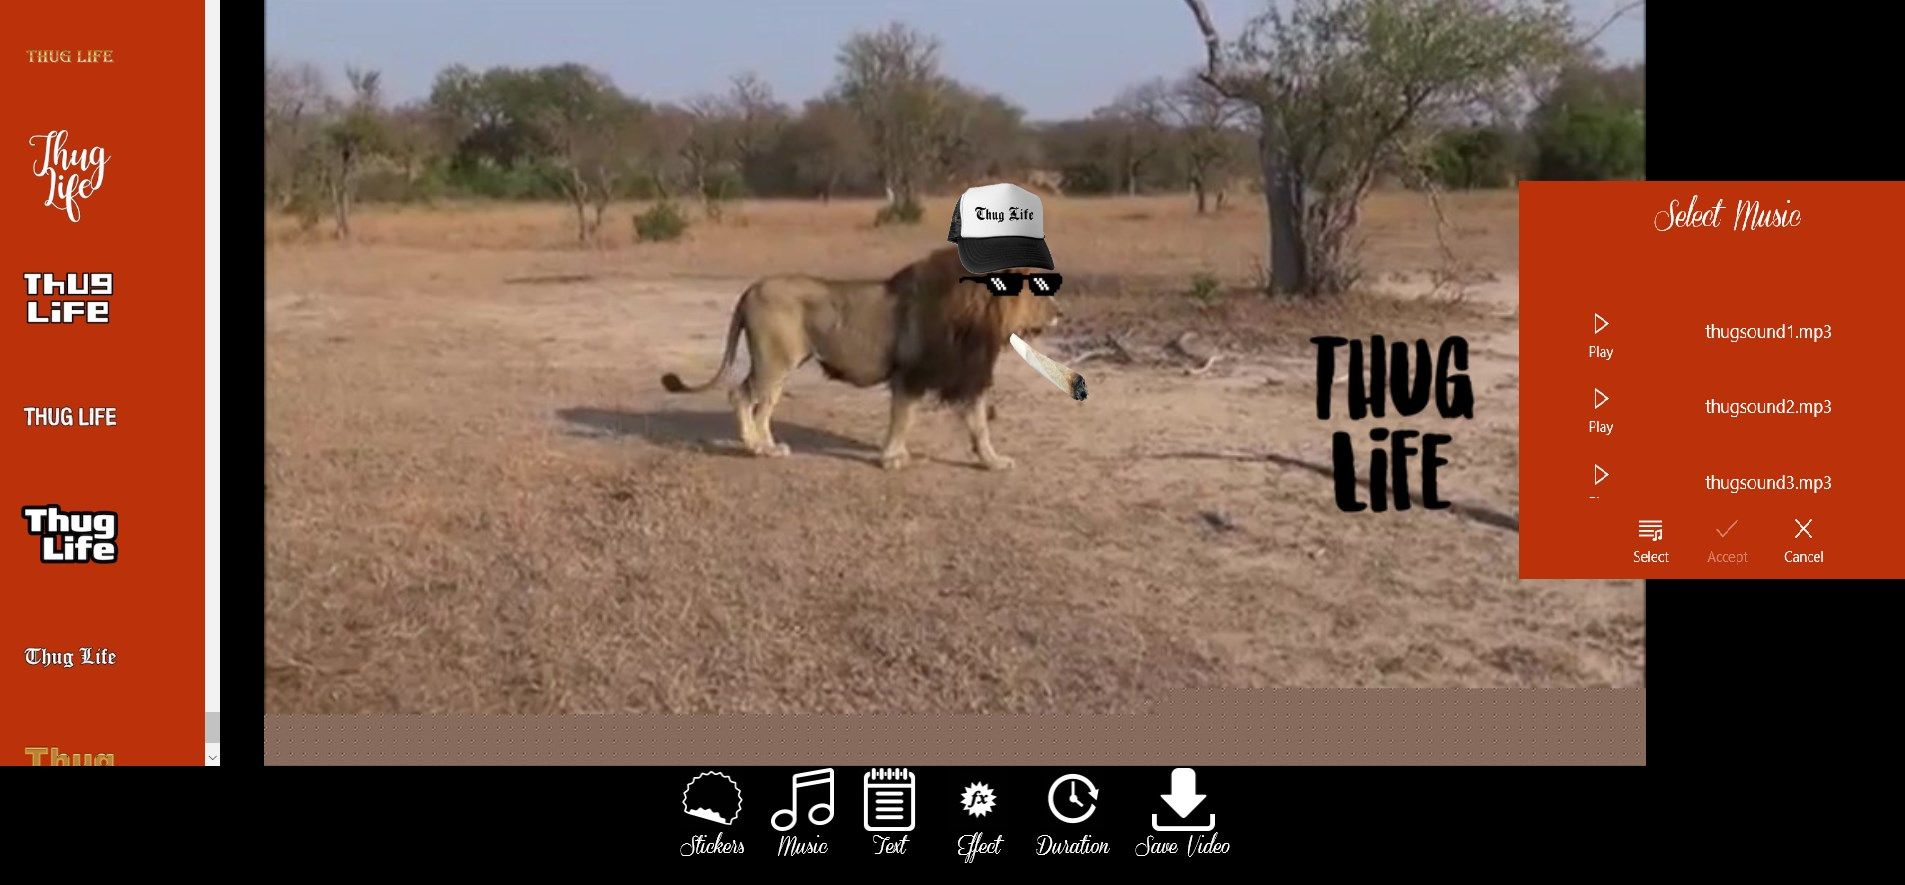 Add Thug Stickers,Text,Duration of Photo and Music